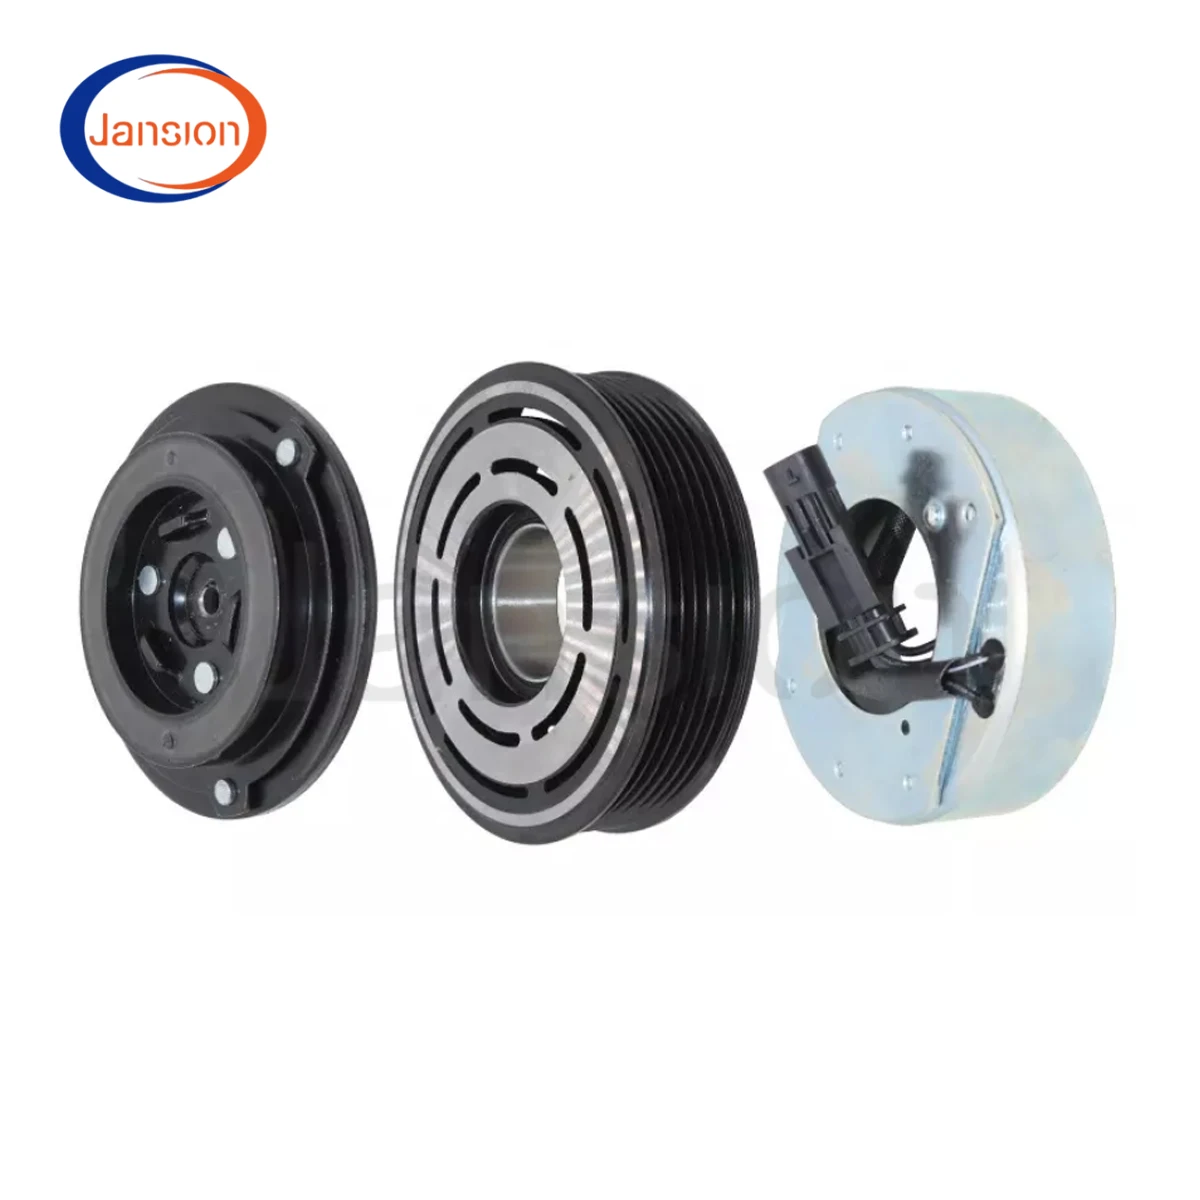 

AC Compressor Clutch Pulley For HEVROLET CRUZE OPEL ASTRA J 13396664 1618400 1618426 1618532 39164665 95518882 13335251 13346491